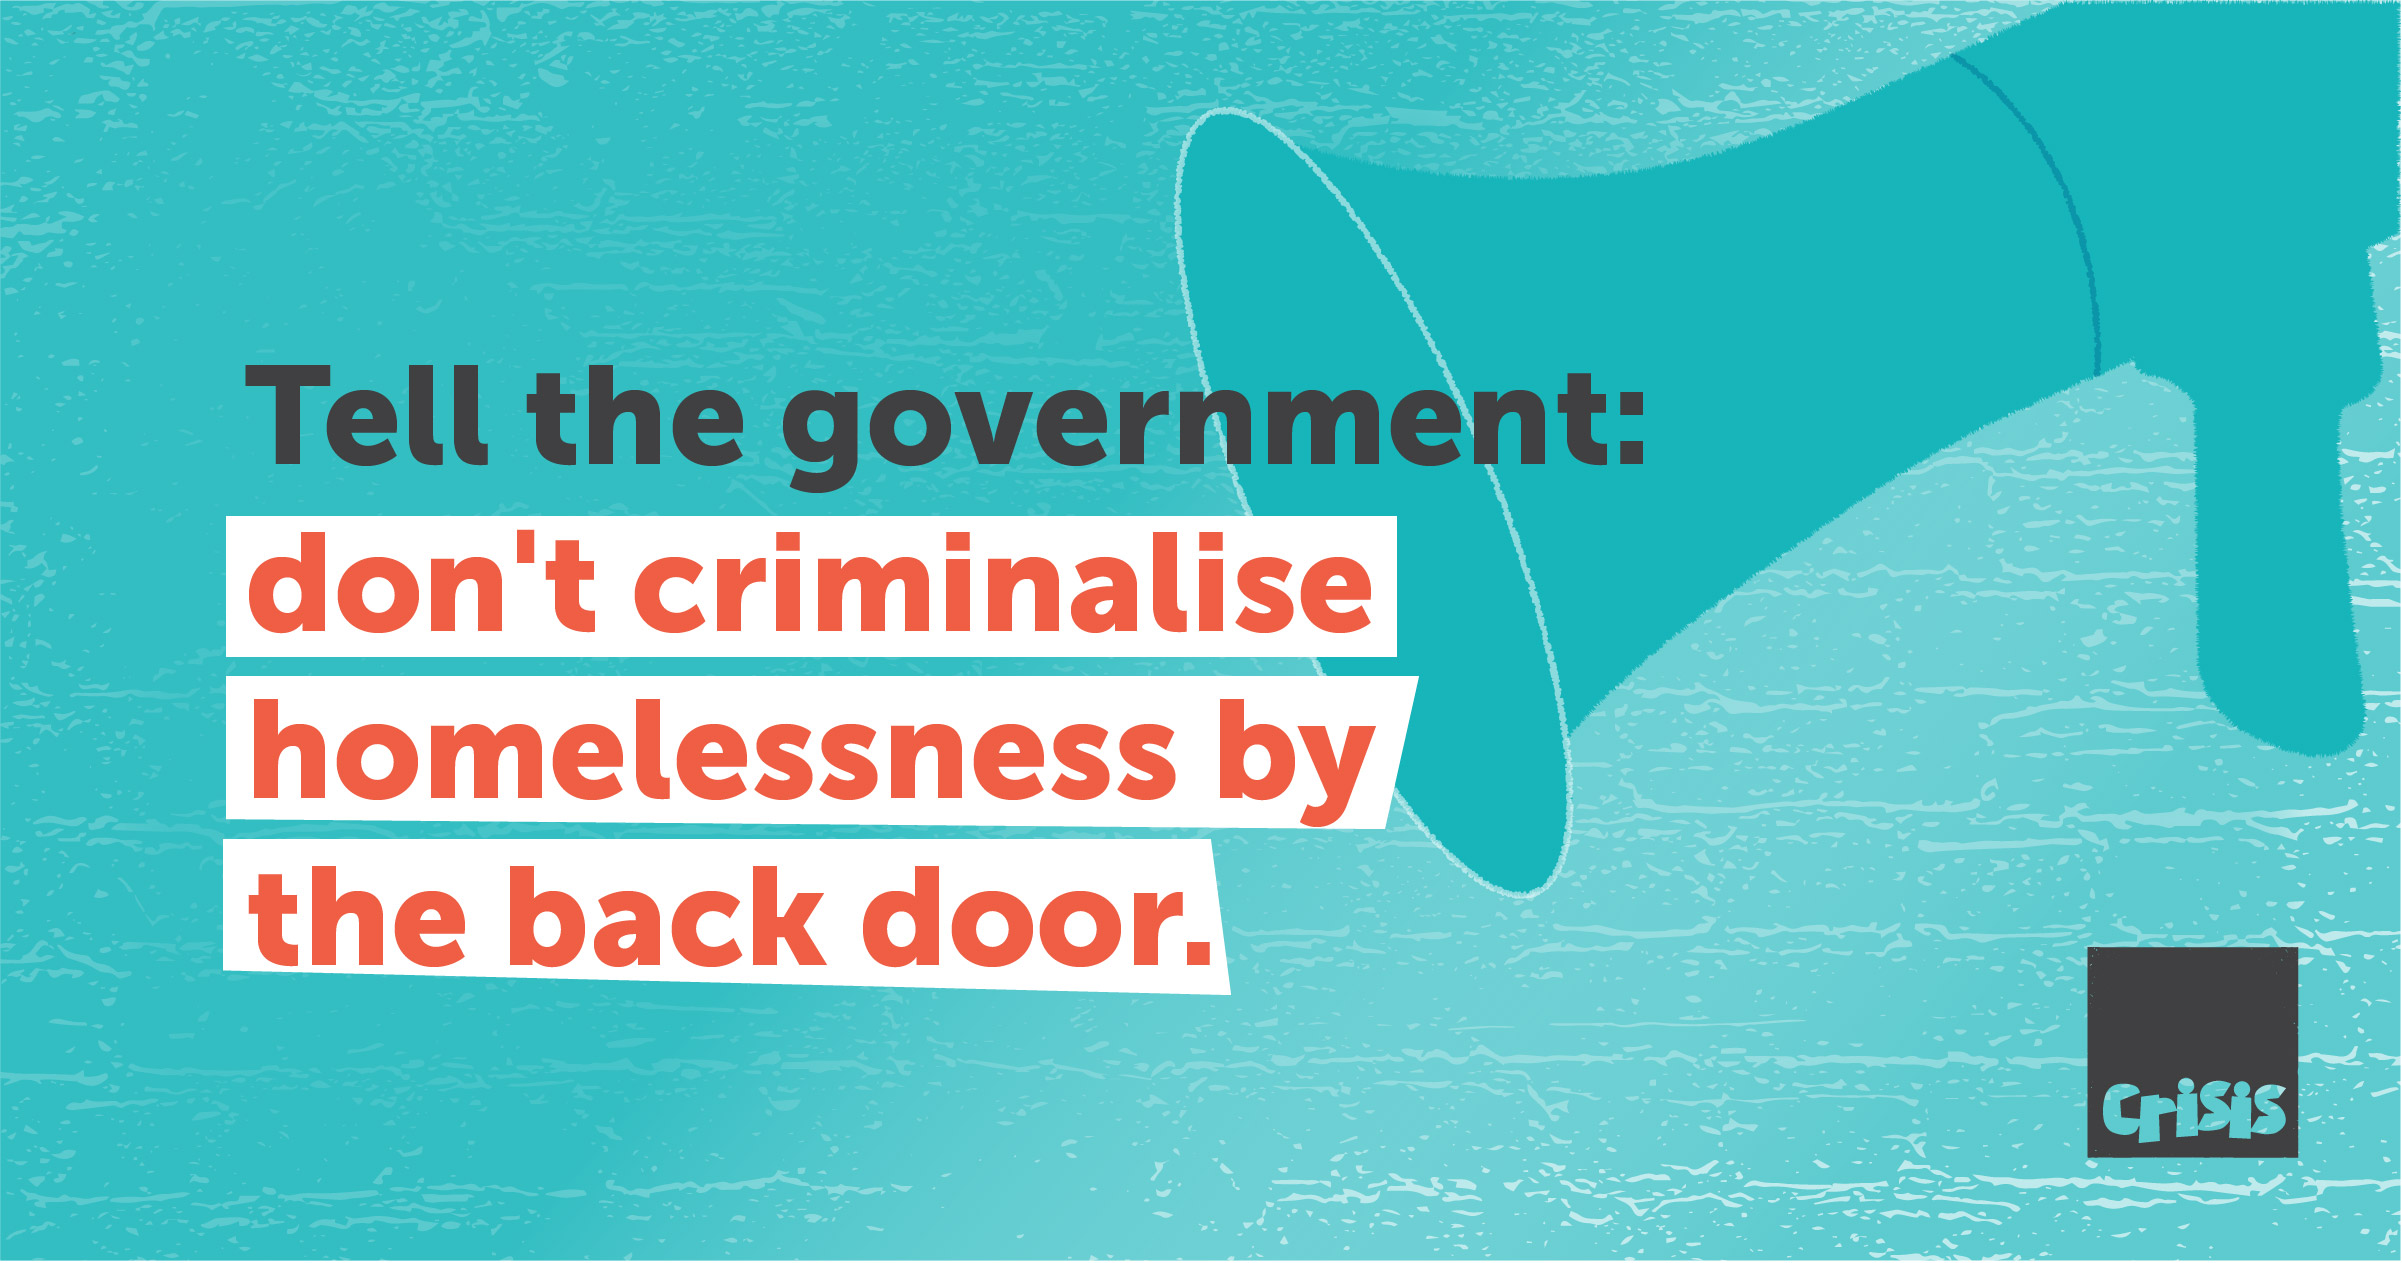 Tell the government: don't criminalise homelessness by the back door